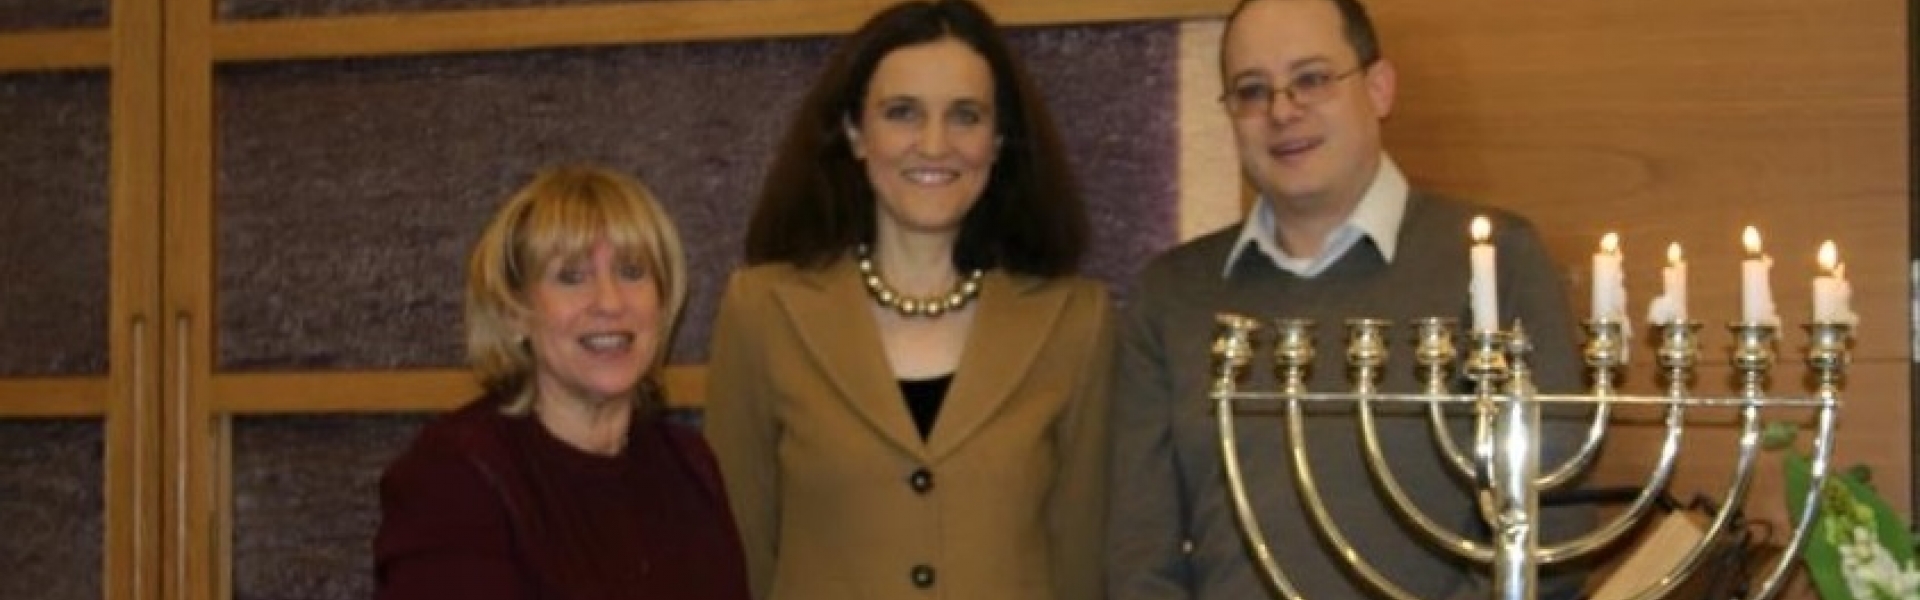 Theresa Villiers at Chanukah event